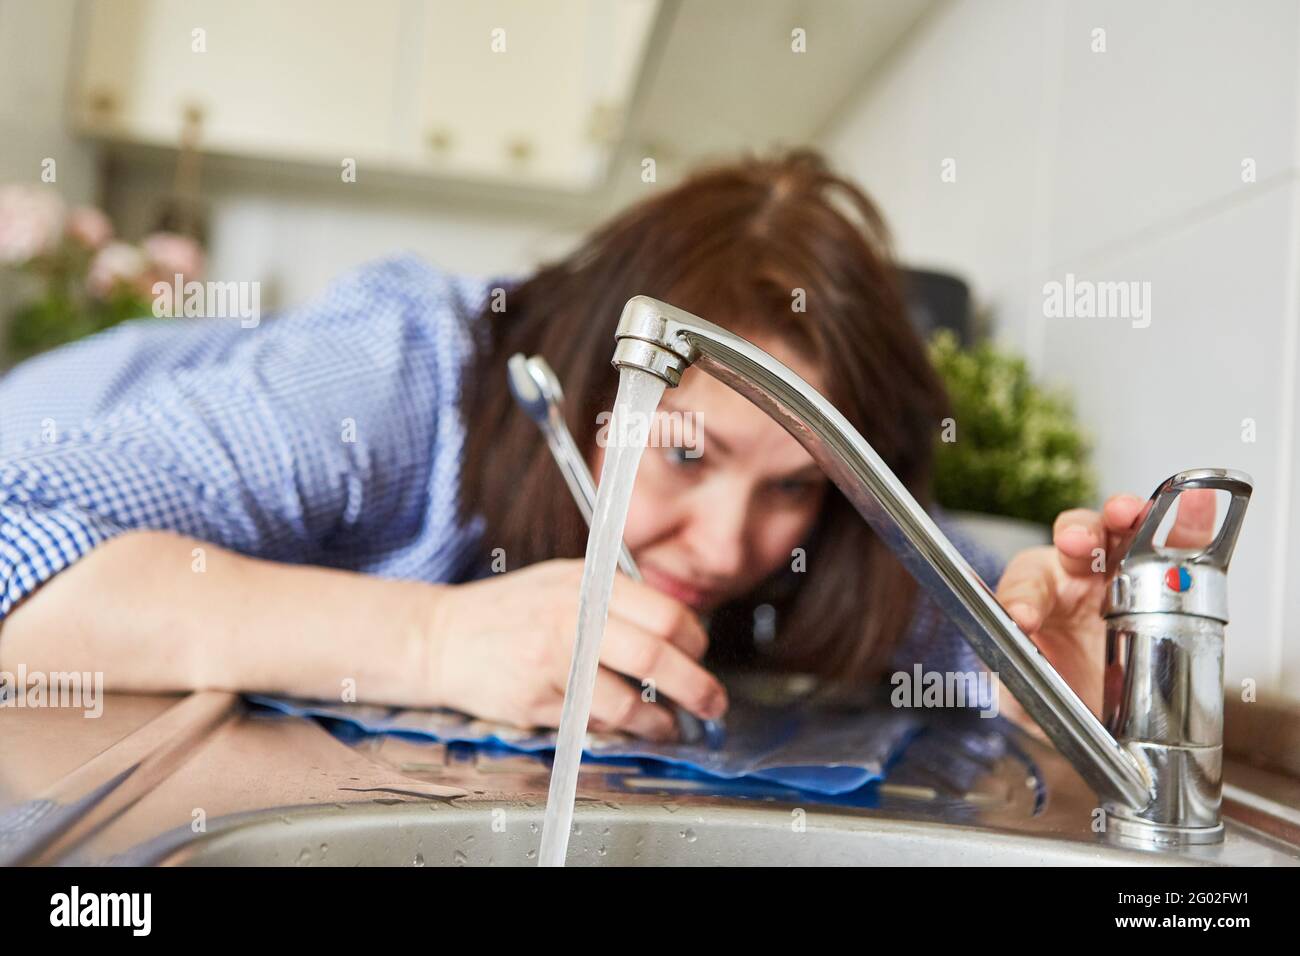 Young woman as a do-it-yourselfer installing the kitchen faucet on the sink Stock Photo